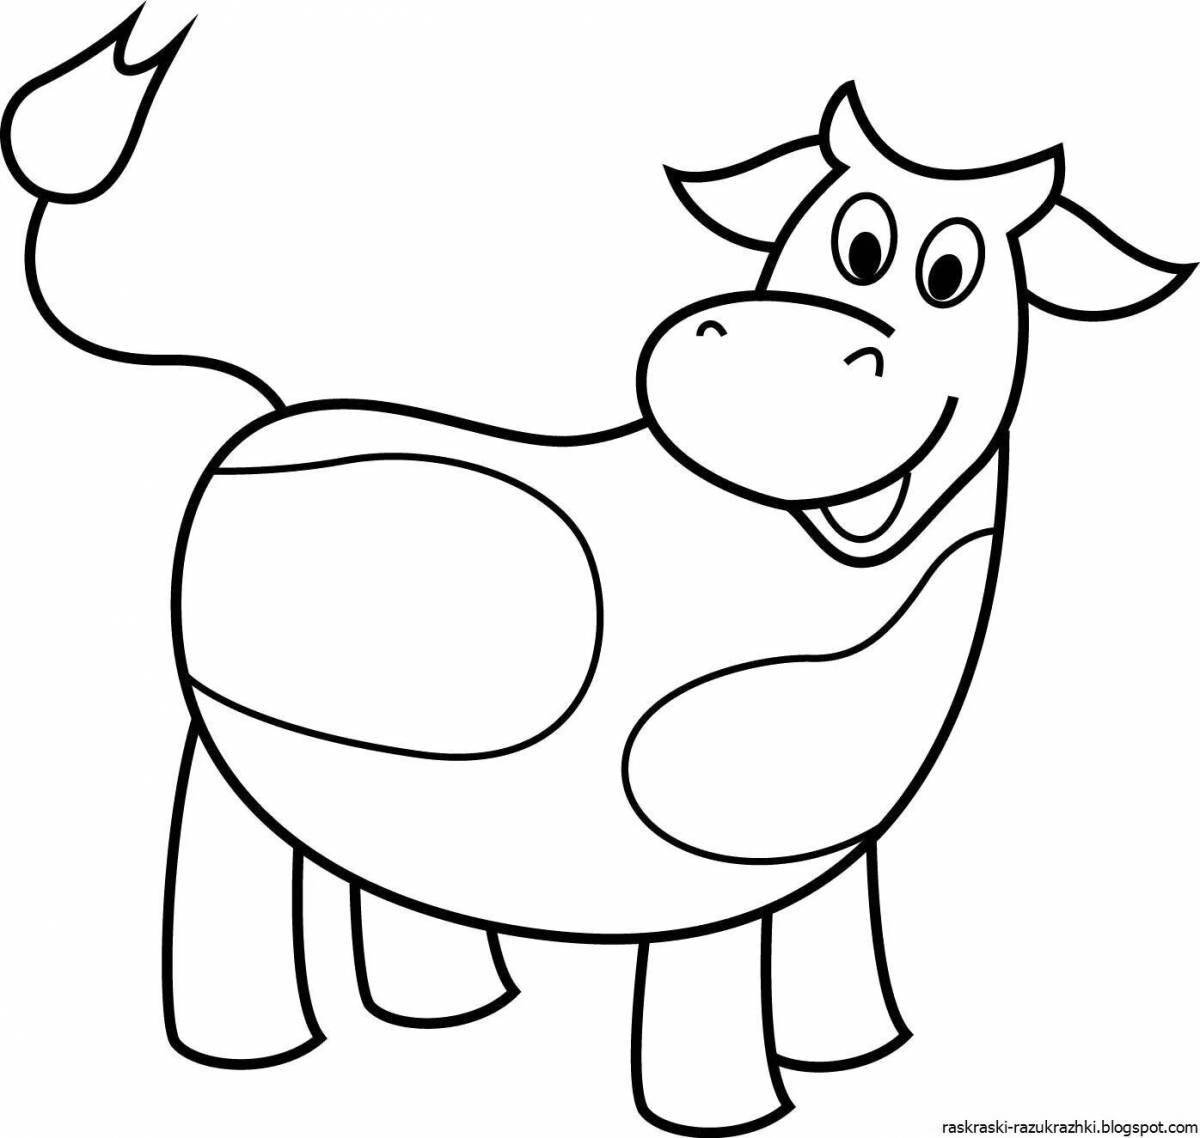 Colorful cow coloring for kids